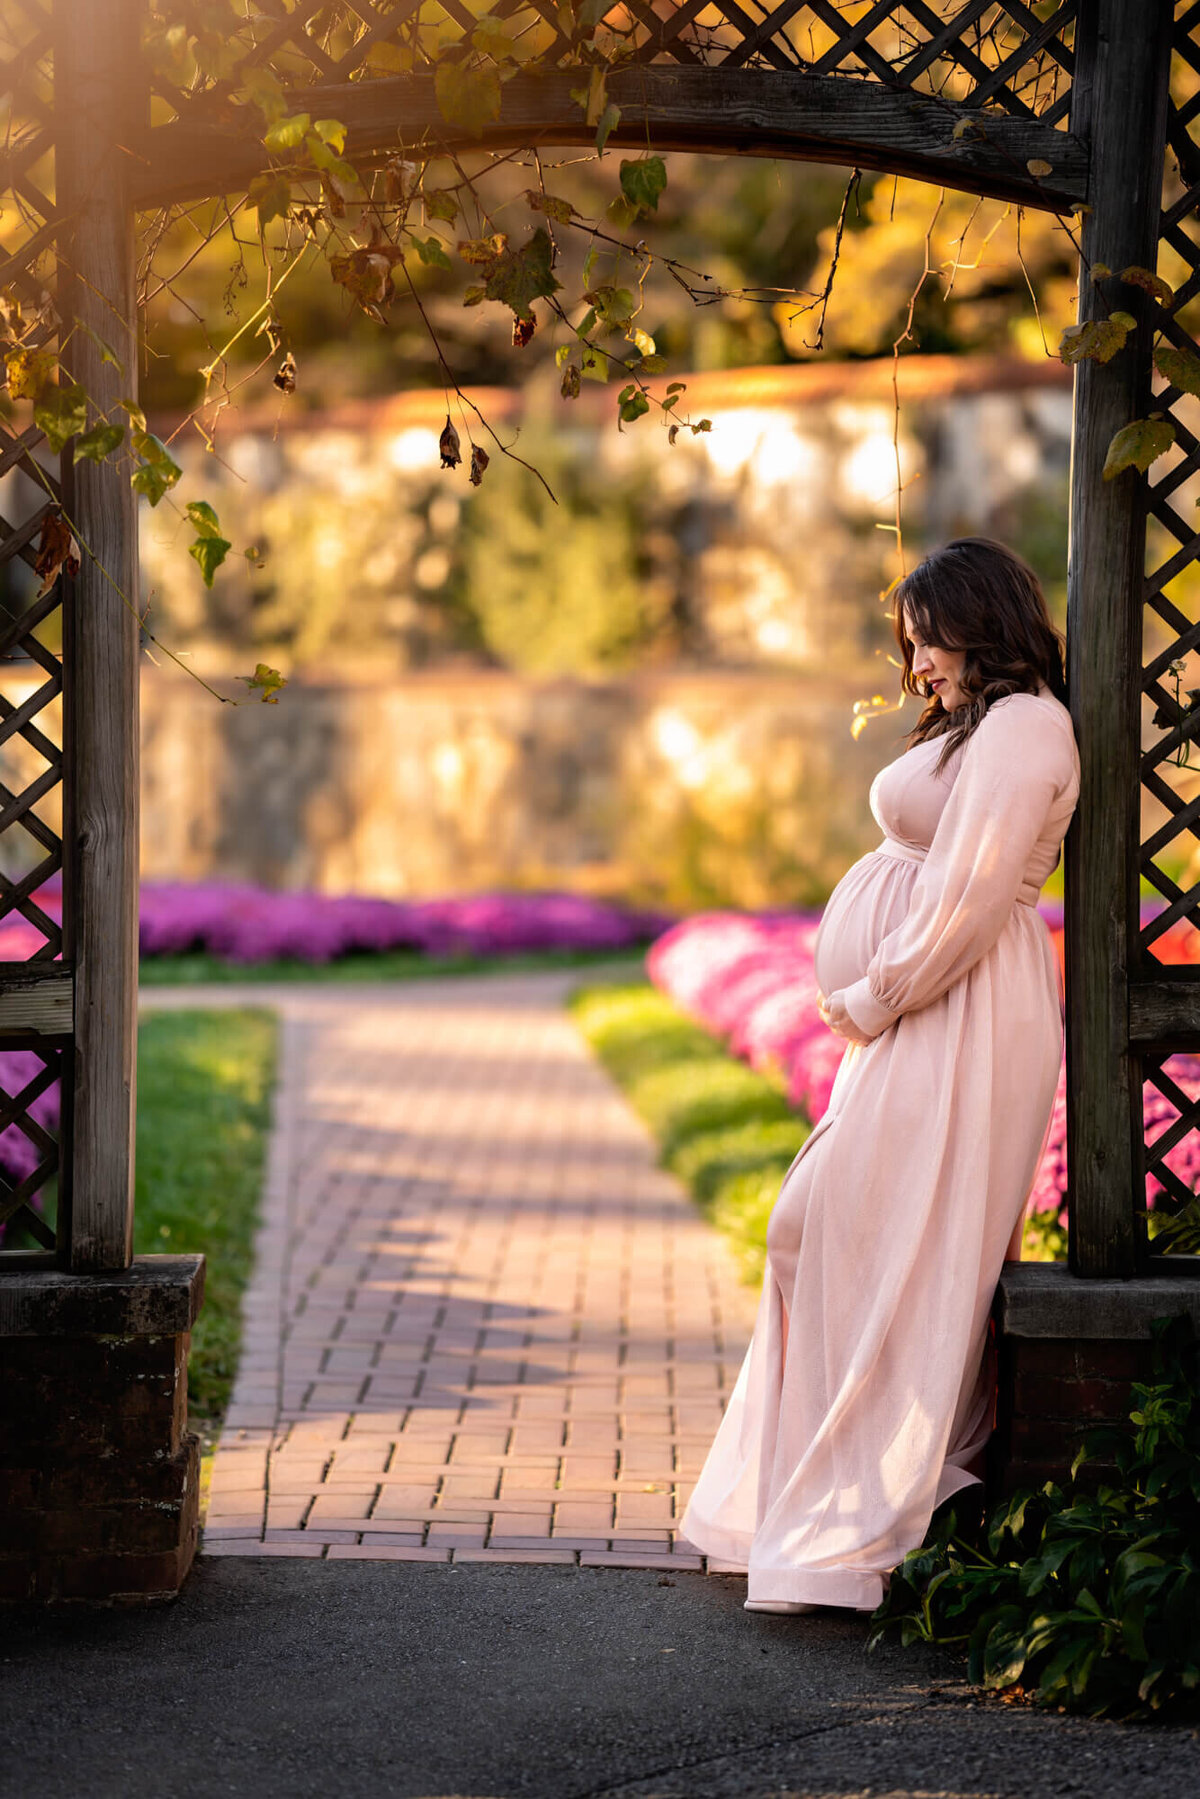 A pregnant woman in a pink dress cradles her bump